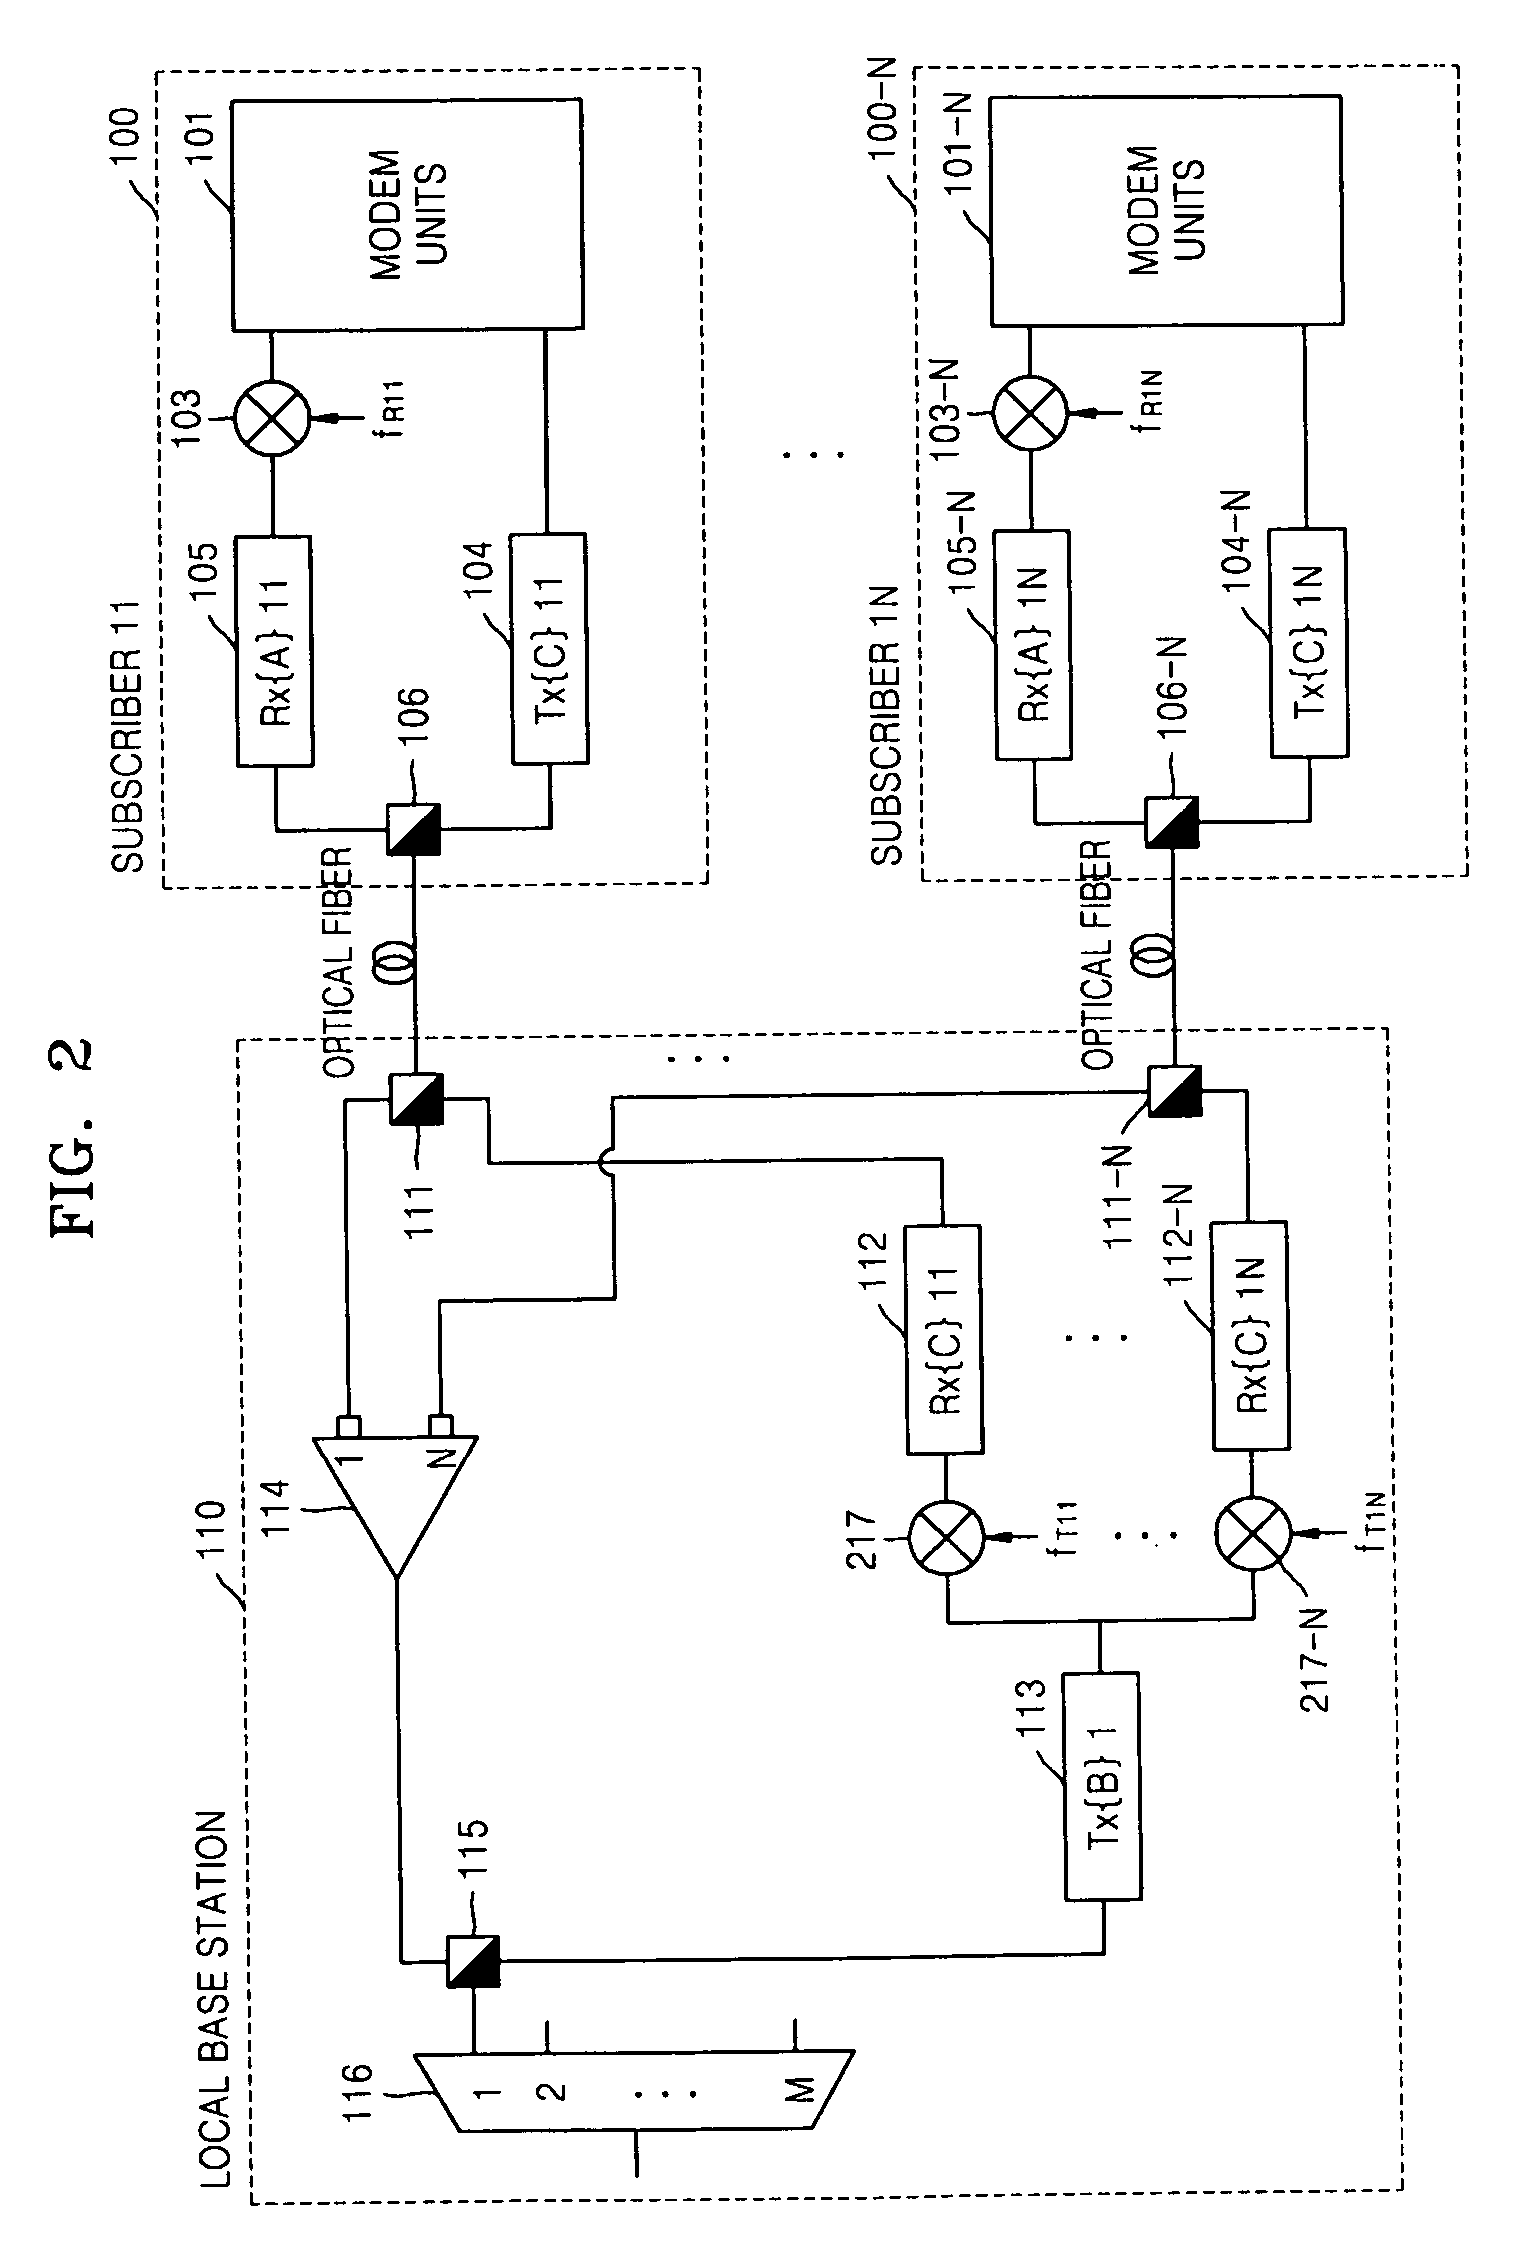 Optical transmission apparatus and optical access network for wavelength-division multiplexing optical network with both sub-carrier multiplex and sub-carrier multiple access schemes